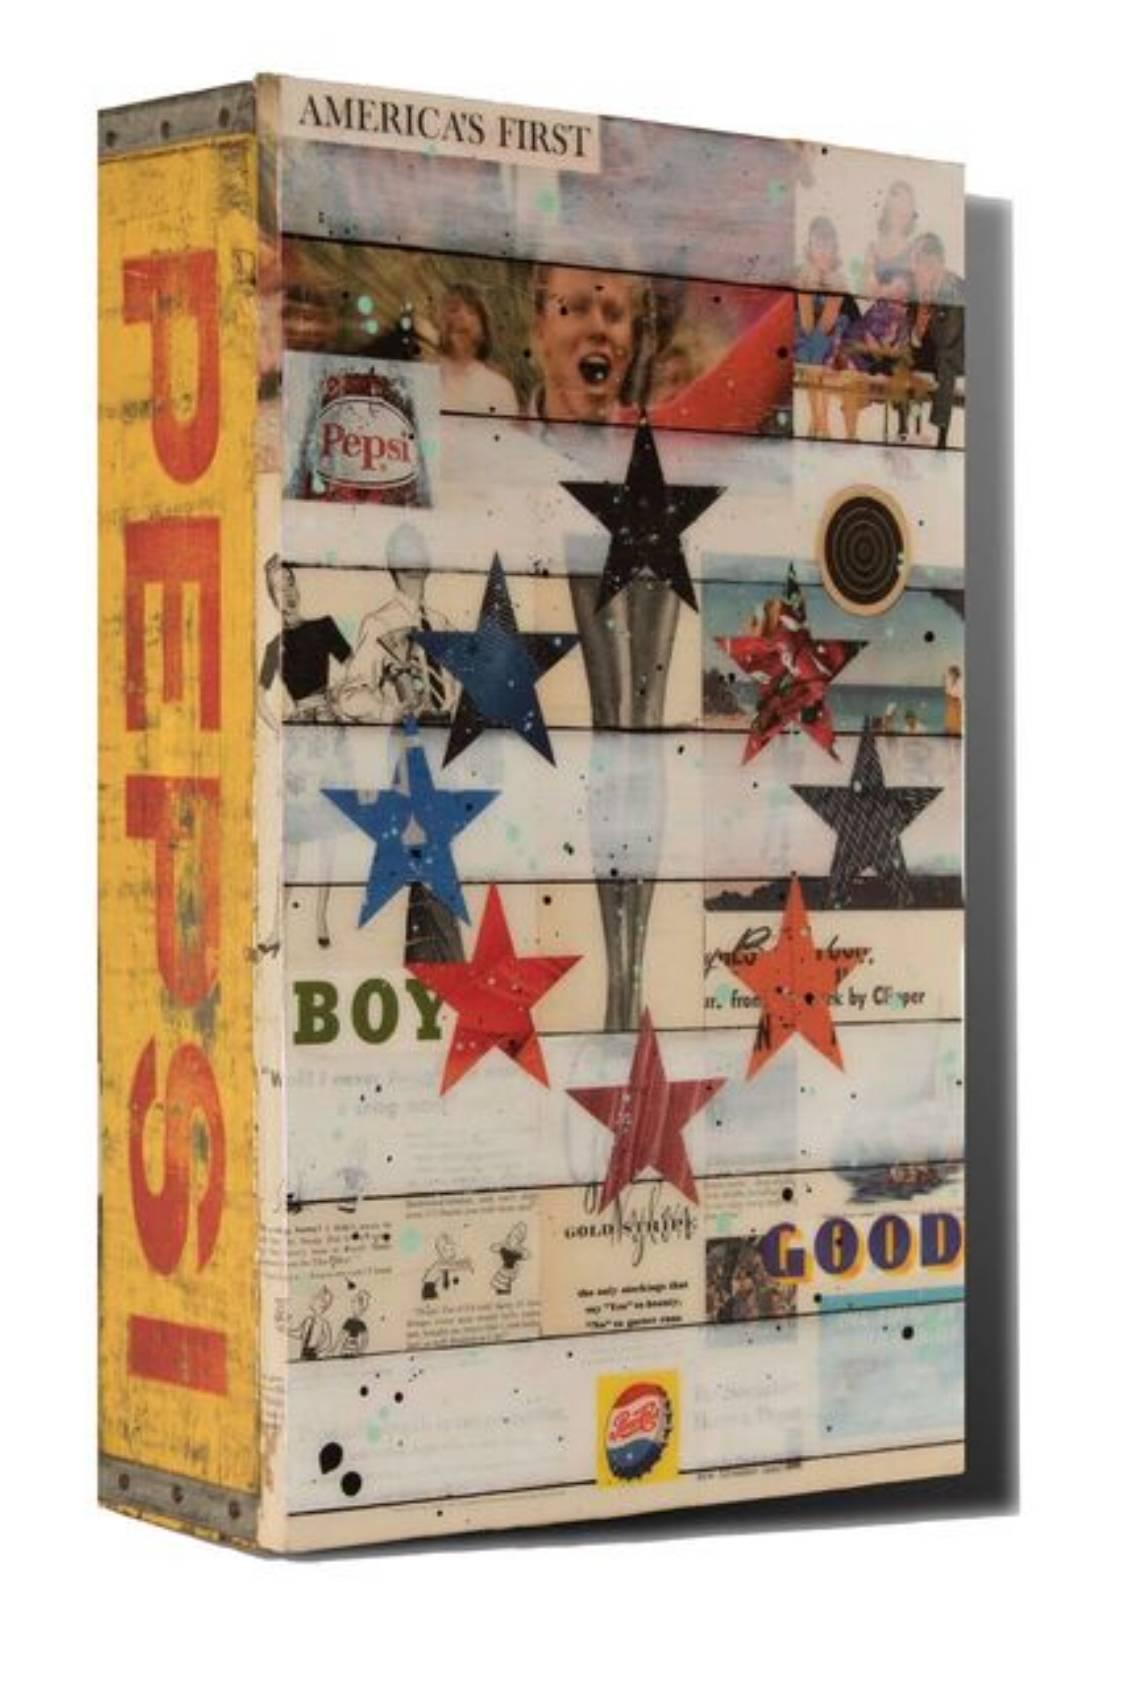 America's First, Pop Art Collage & Painting on Vintage Soda Crate - Mixed Media Art by John Joseph Hanright